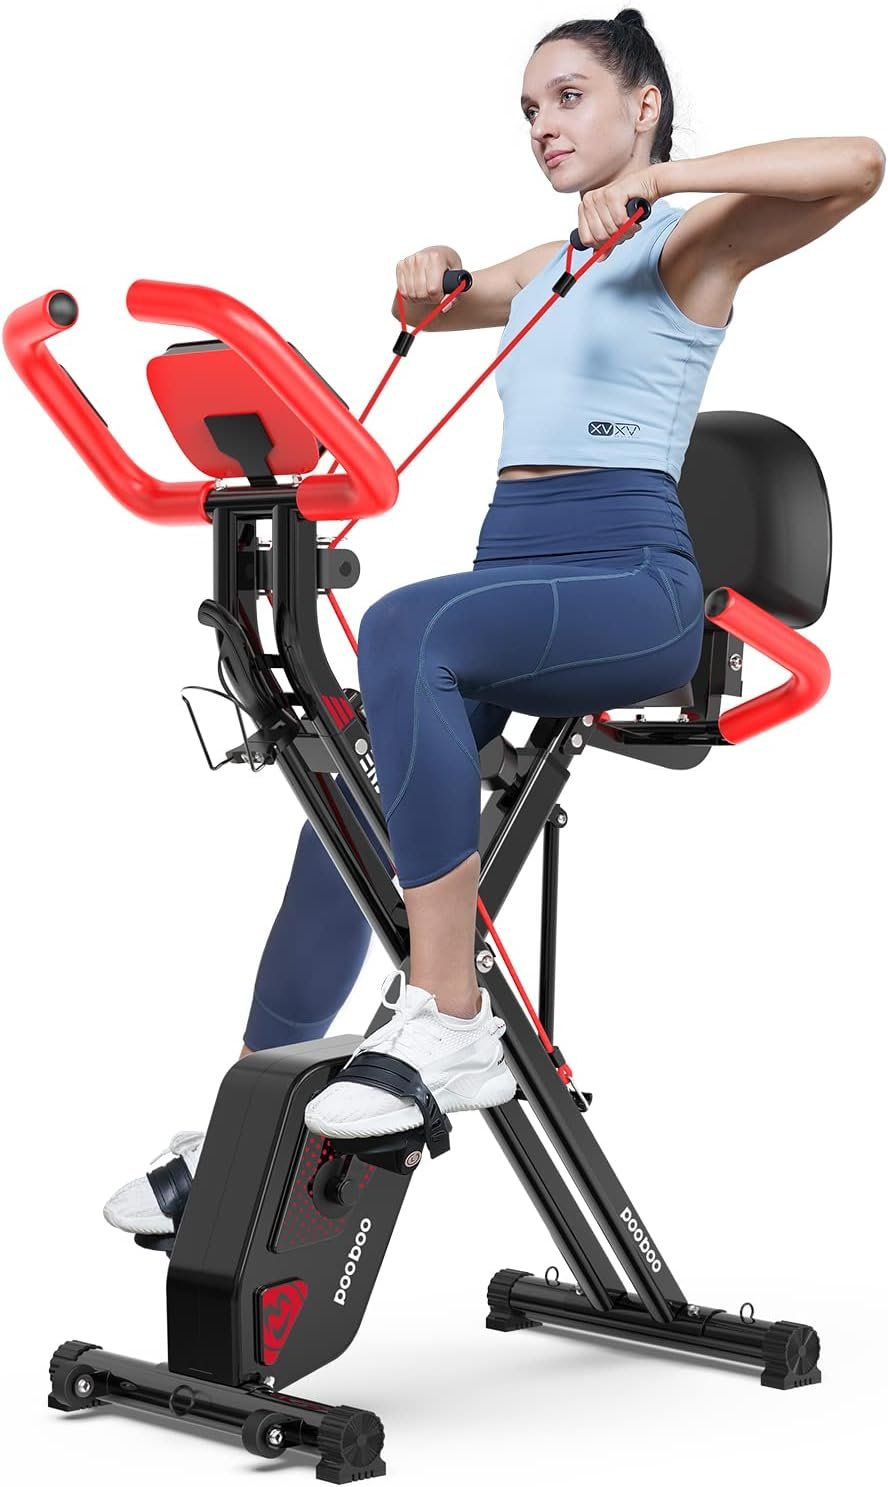 pooboo Folding Exercise Bike Review